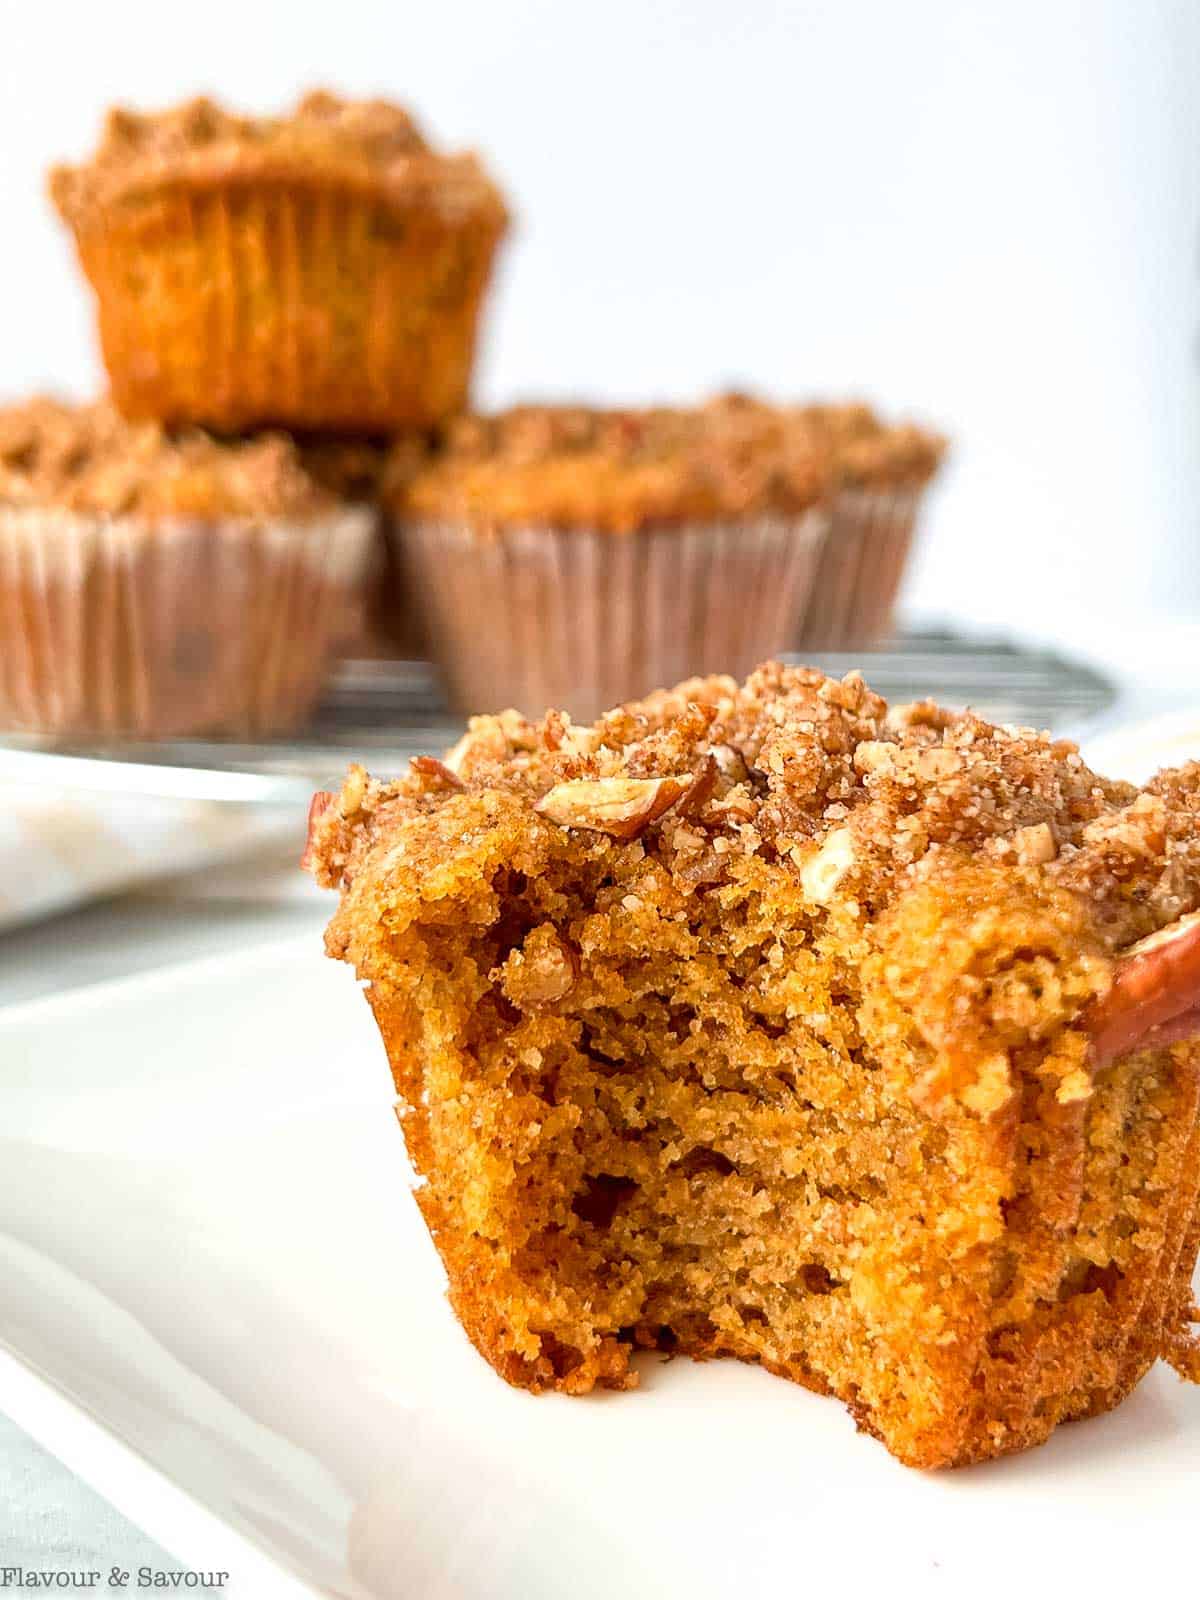 Close up view of an almond flour pumpkin spice muffin showing the inside texture.